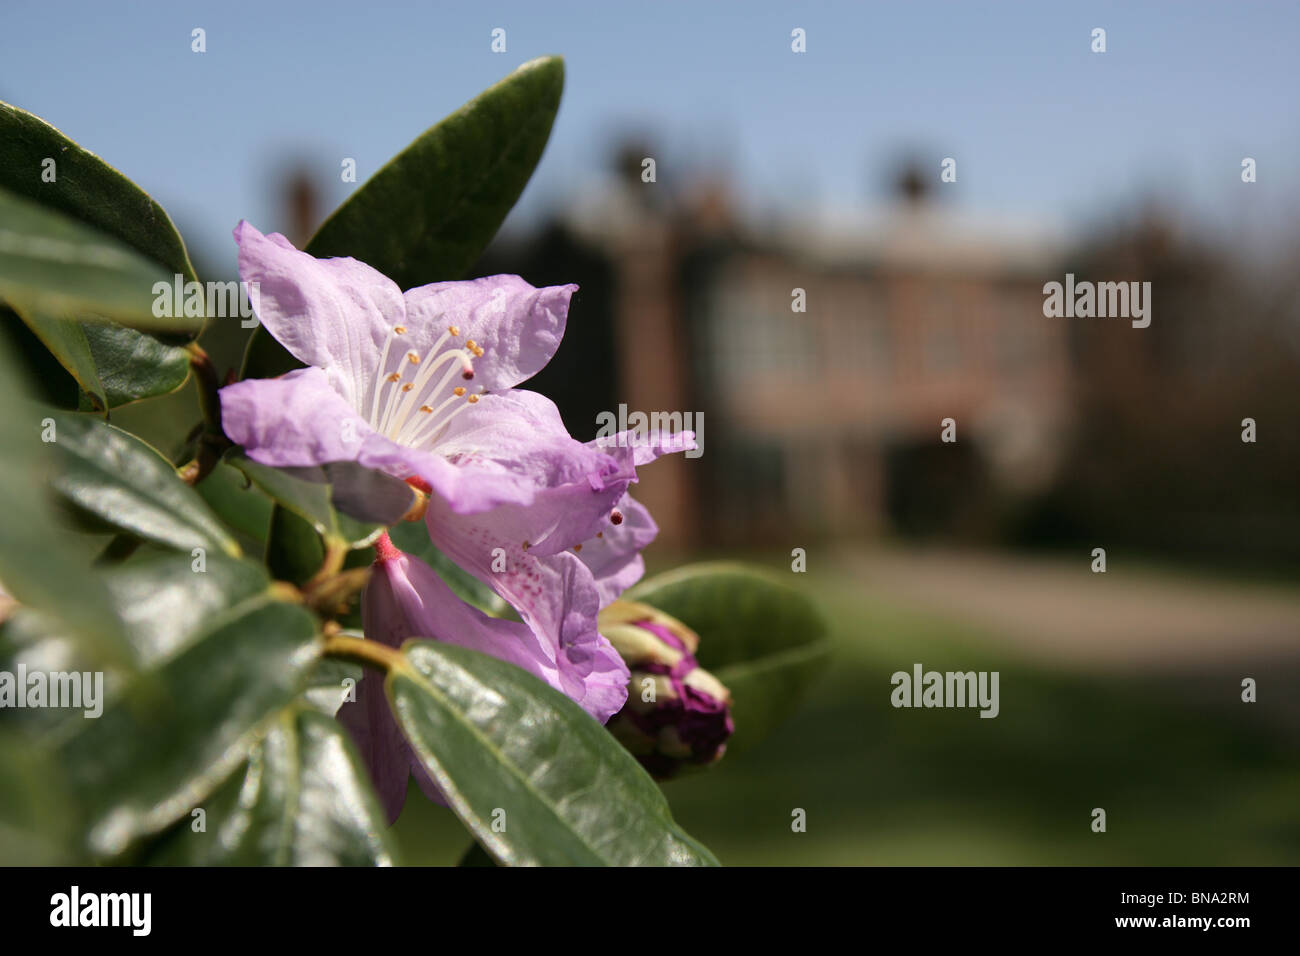 Arley Hall & Gardens, England. Close up view of violet rhododendrons on the Furlong Walk of Arley Hall Gardens. Stock Photo